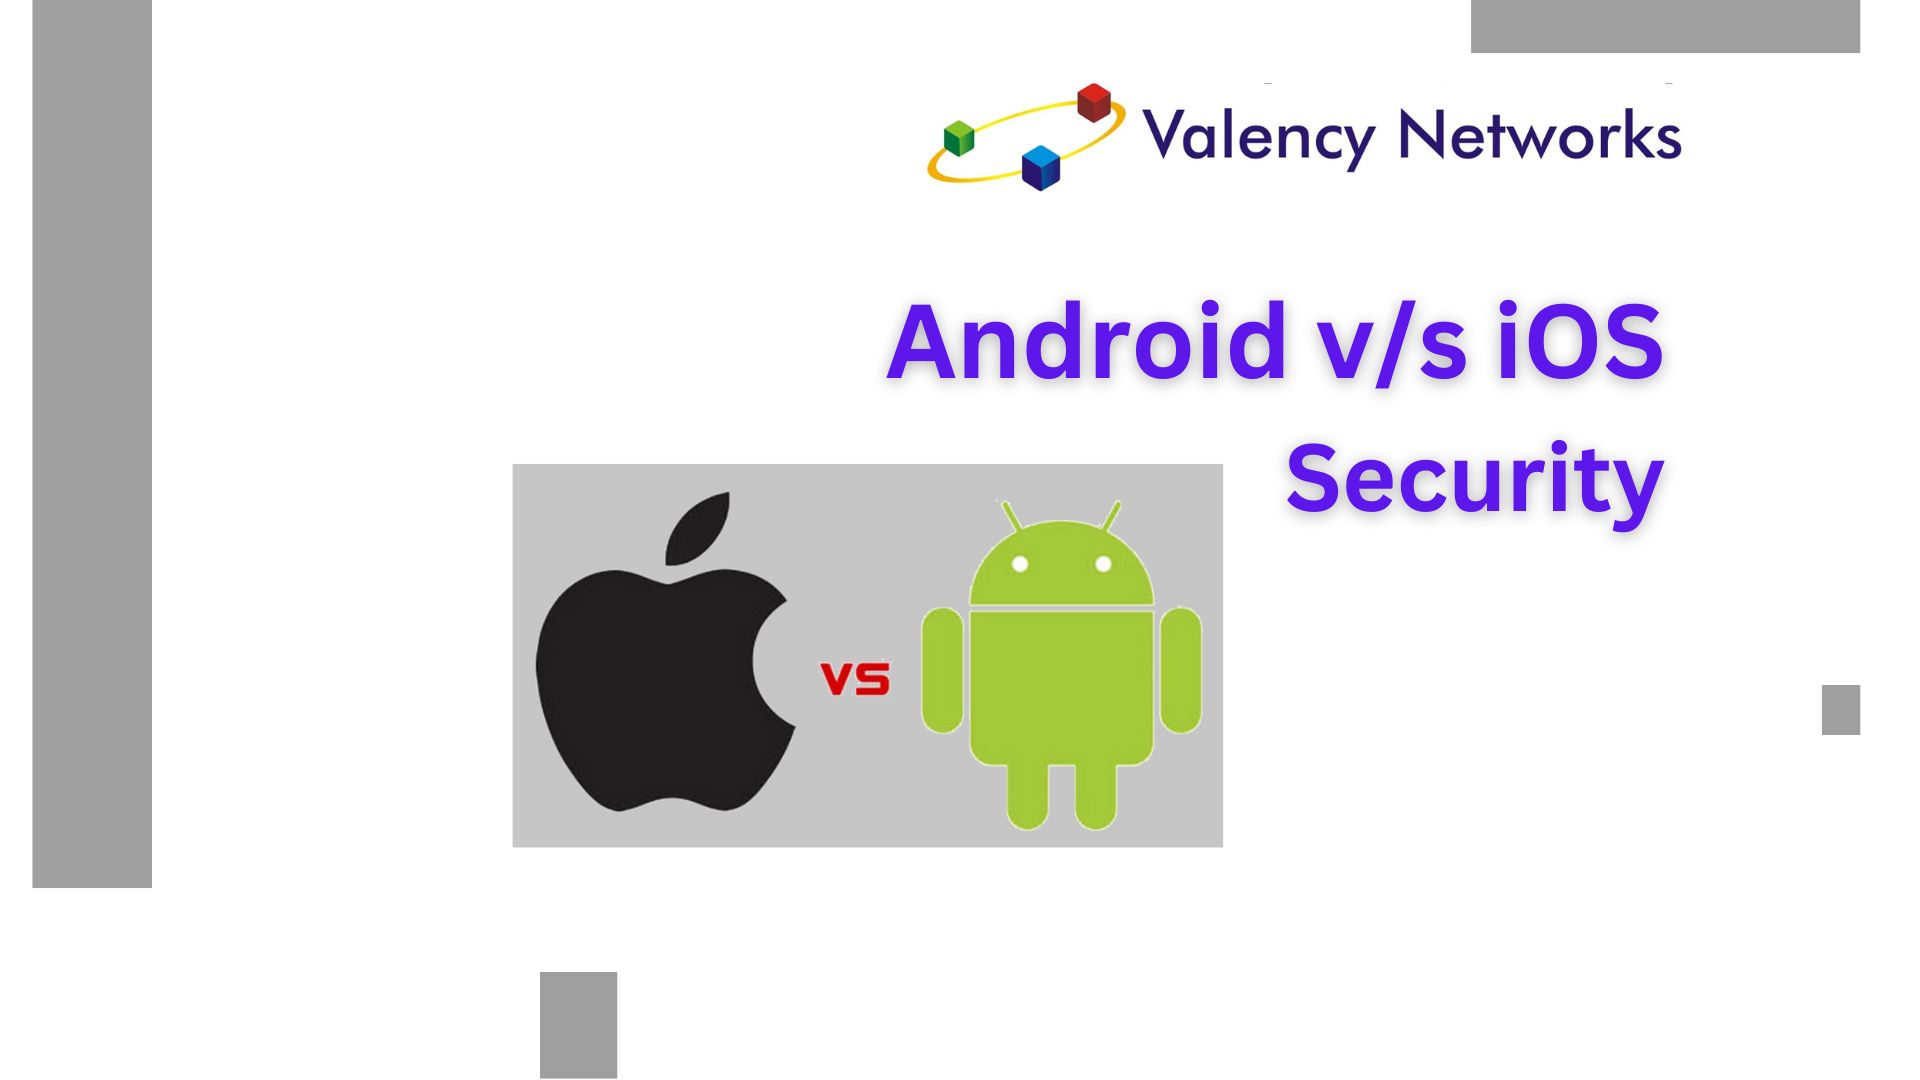 Are Android Apps More Secure or iOS Apps